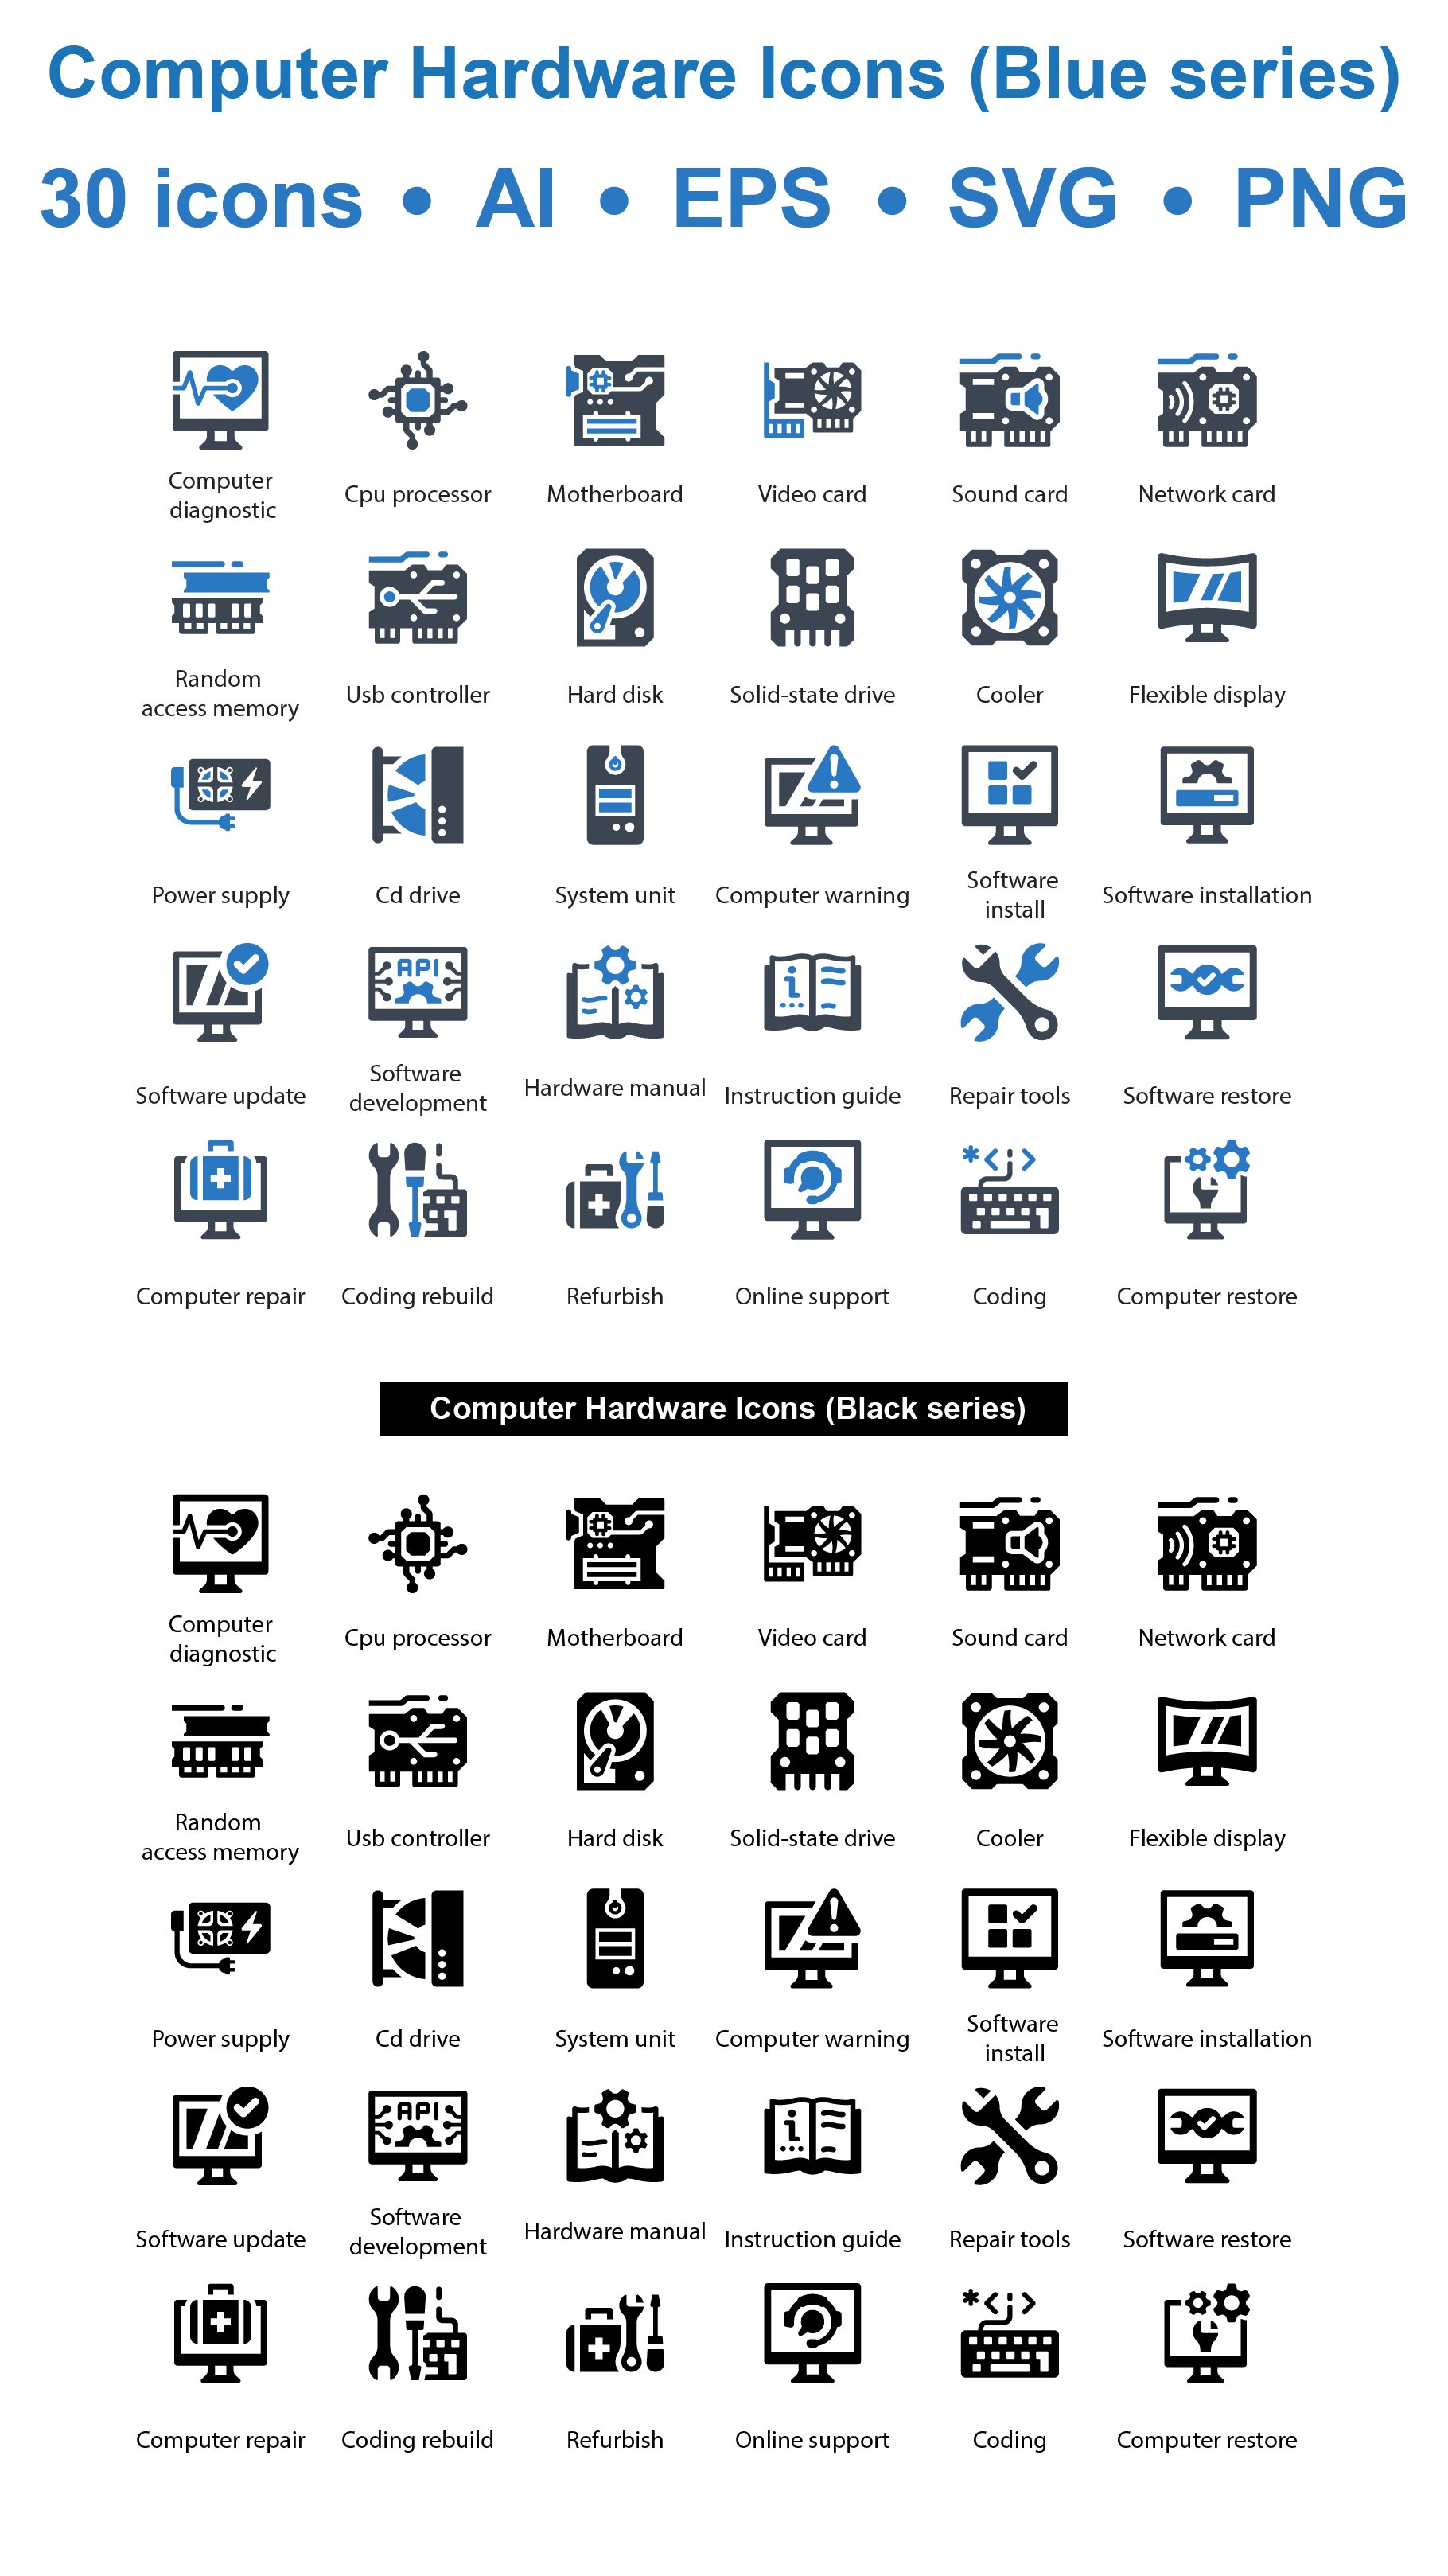 Computer Hardware Icons cover image.